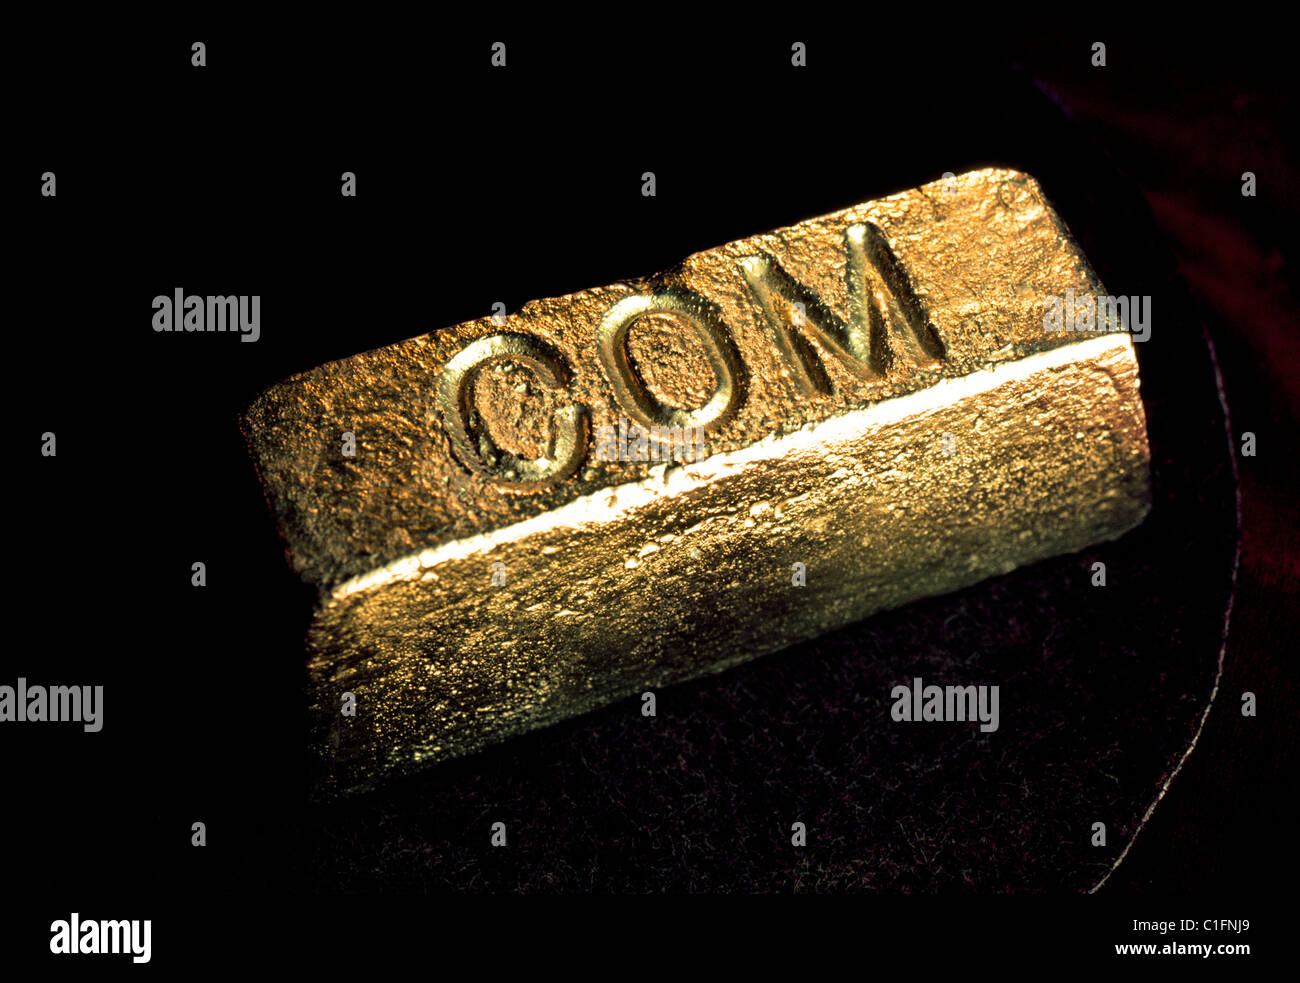 An ingot of gold molded and stamped by the Chamber of Mines (COM) at a Johannesburg gold mine in South Africa. Stock Photo